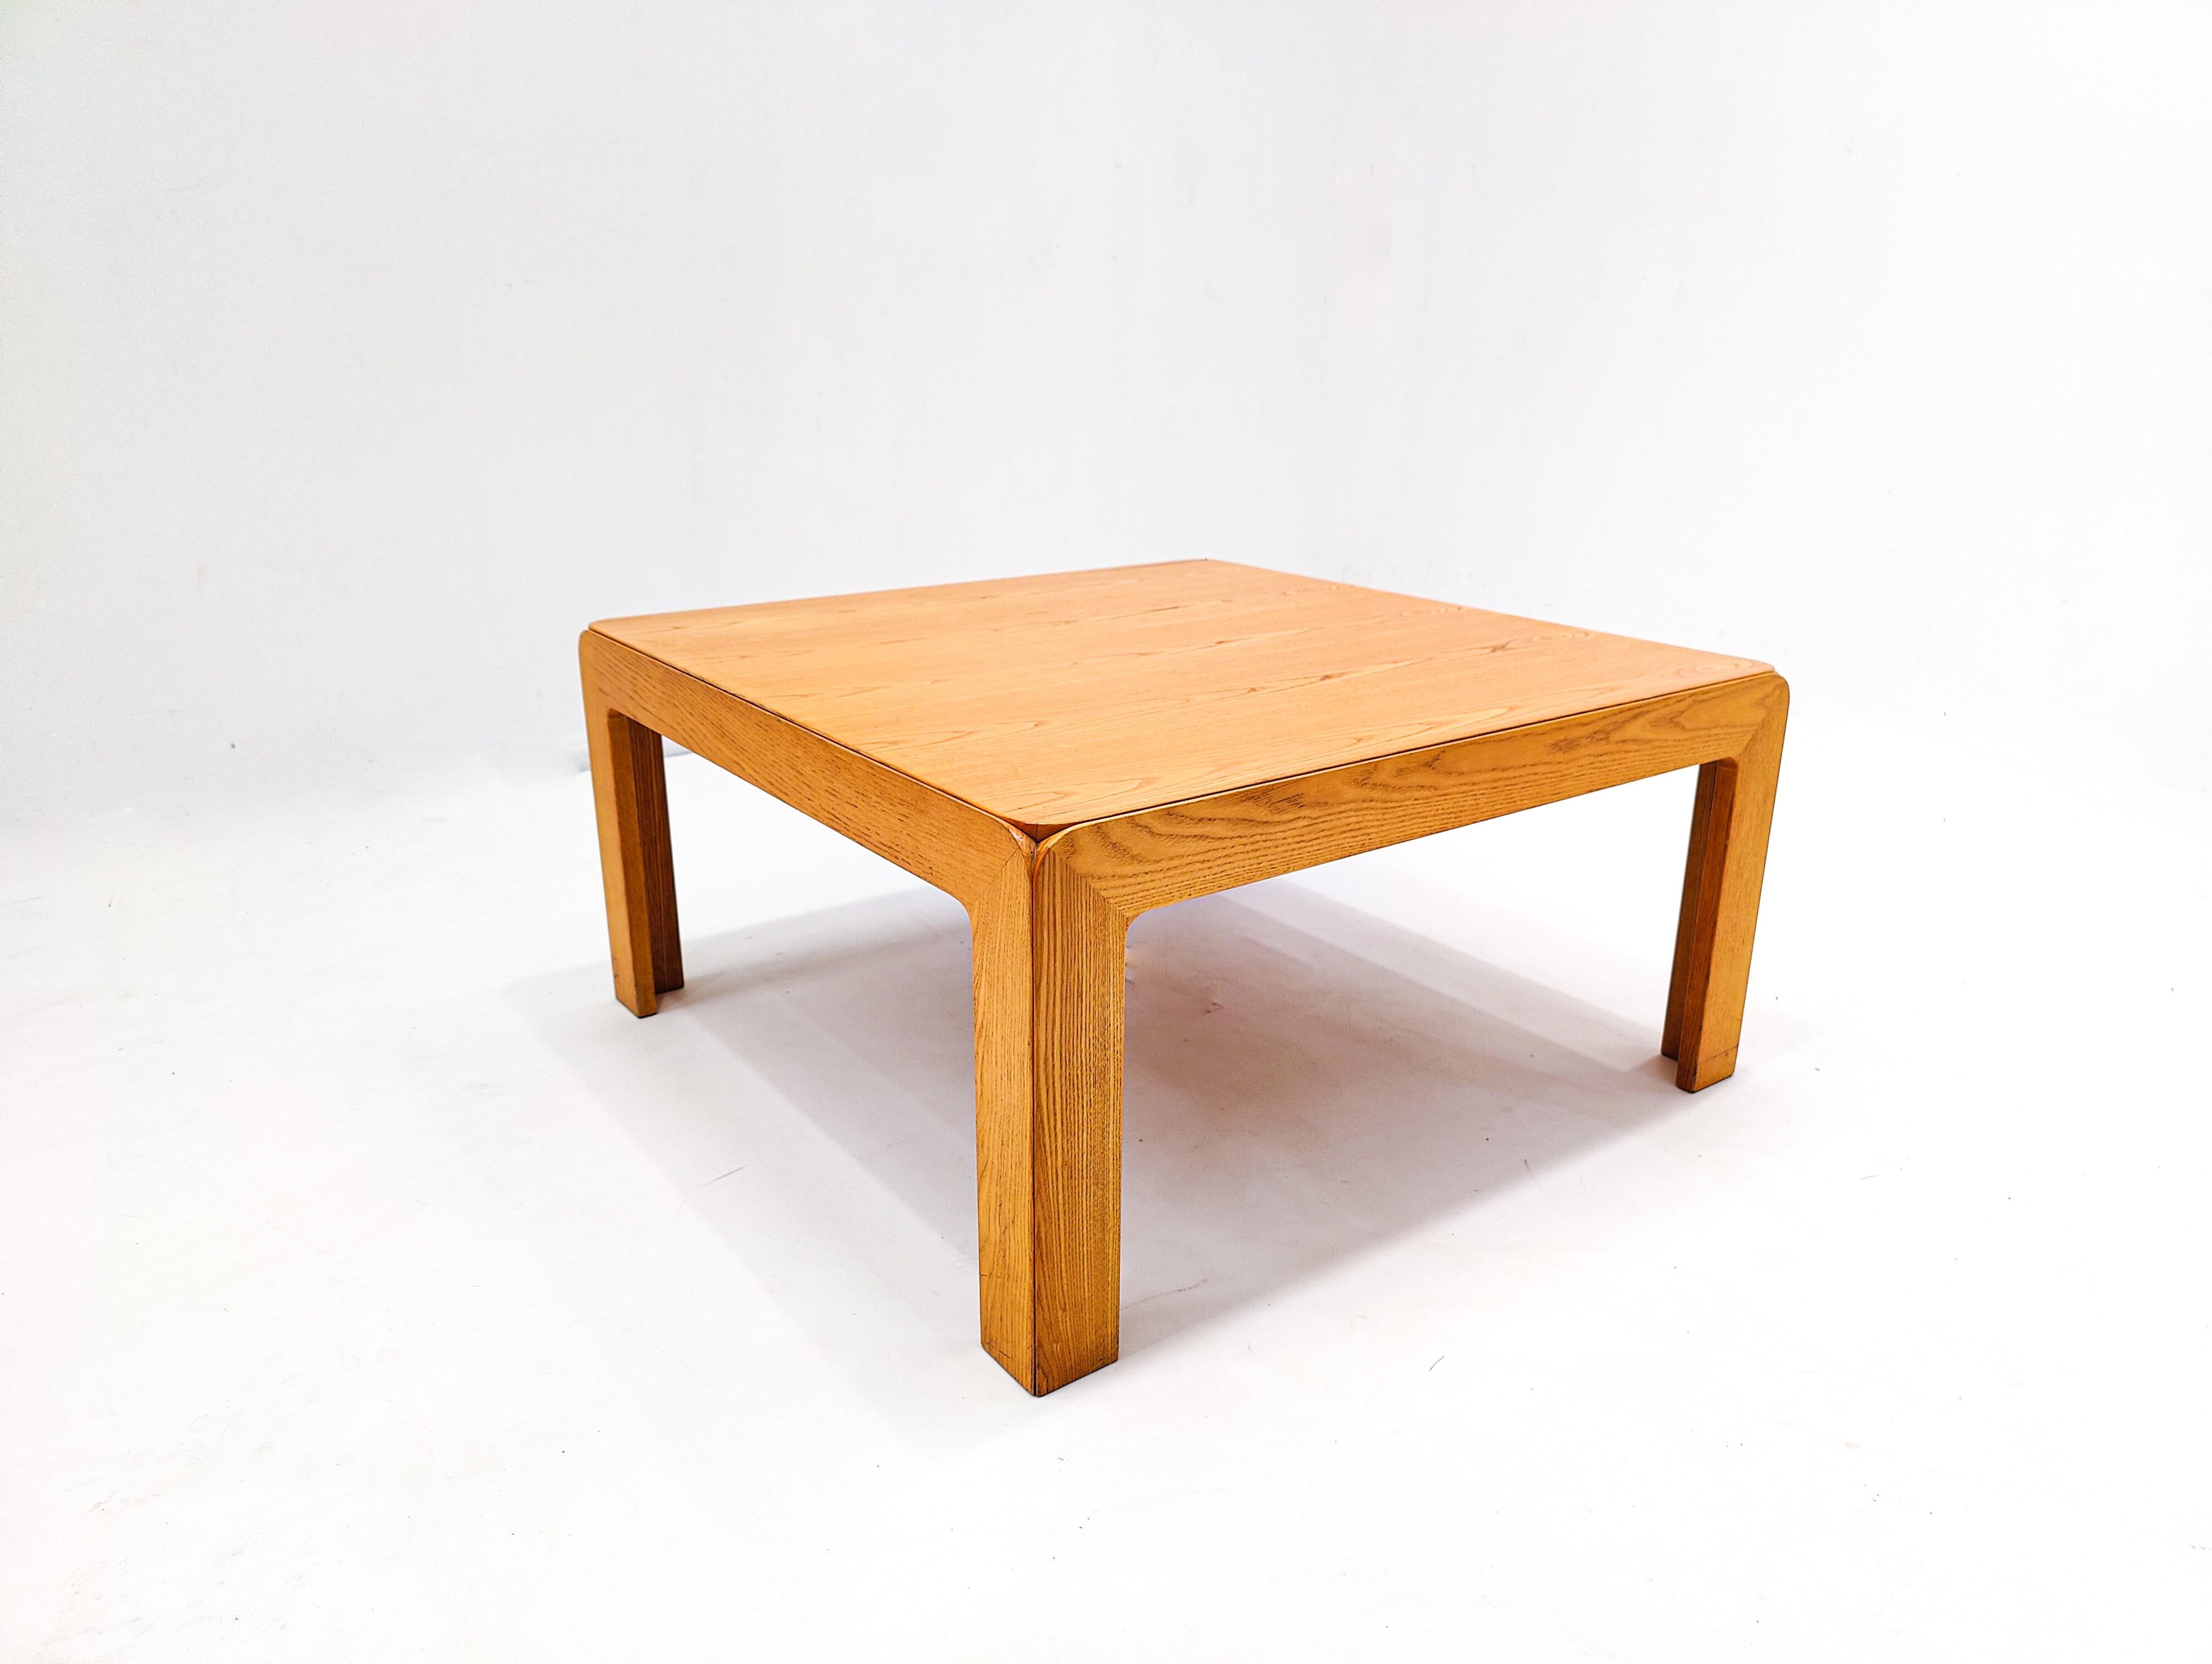 Dutch Mid-Century Square Wooden Coffee Table by Derk Jan de Vries - The Netherlands For Sale